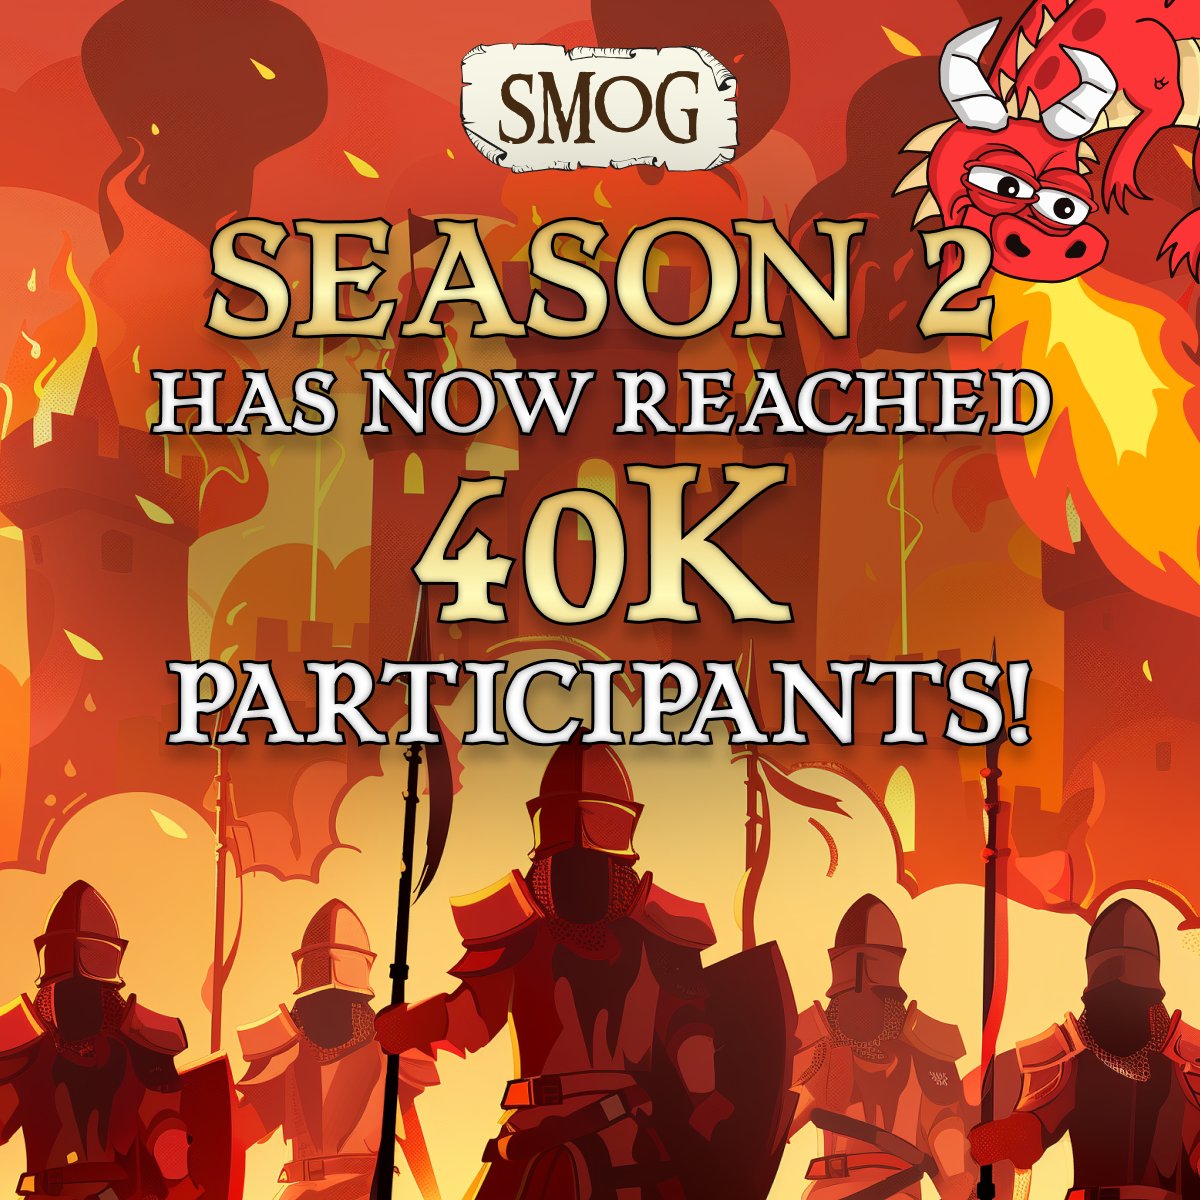 🎉 Another milestone for #SMOG in the Season 2 #Airdrop! 🚀 We've reached over 40,000 participants on @zealy_io! 🙌 Thank you #Dragons and let’s keep our community growing!🐲 Trade $SMOG now and get more points! 🏆 bit.ly/BuySmog #SmogSwap #TradeSmog #Solana